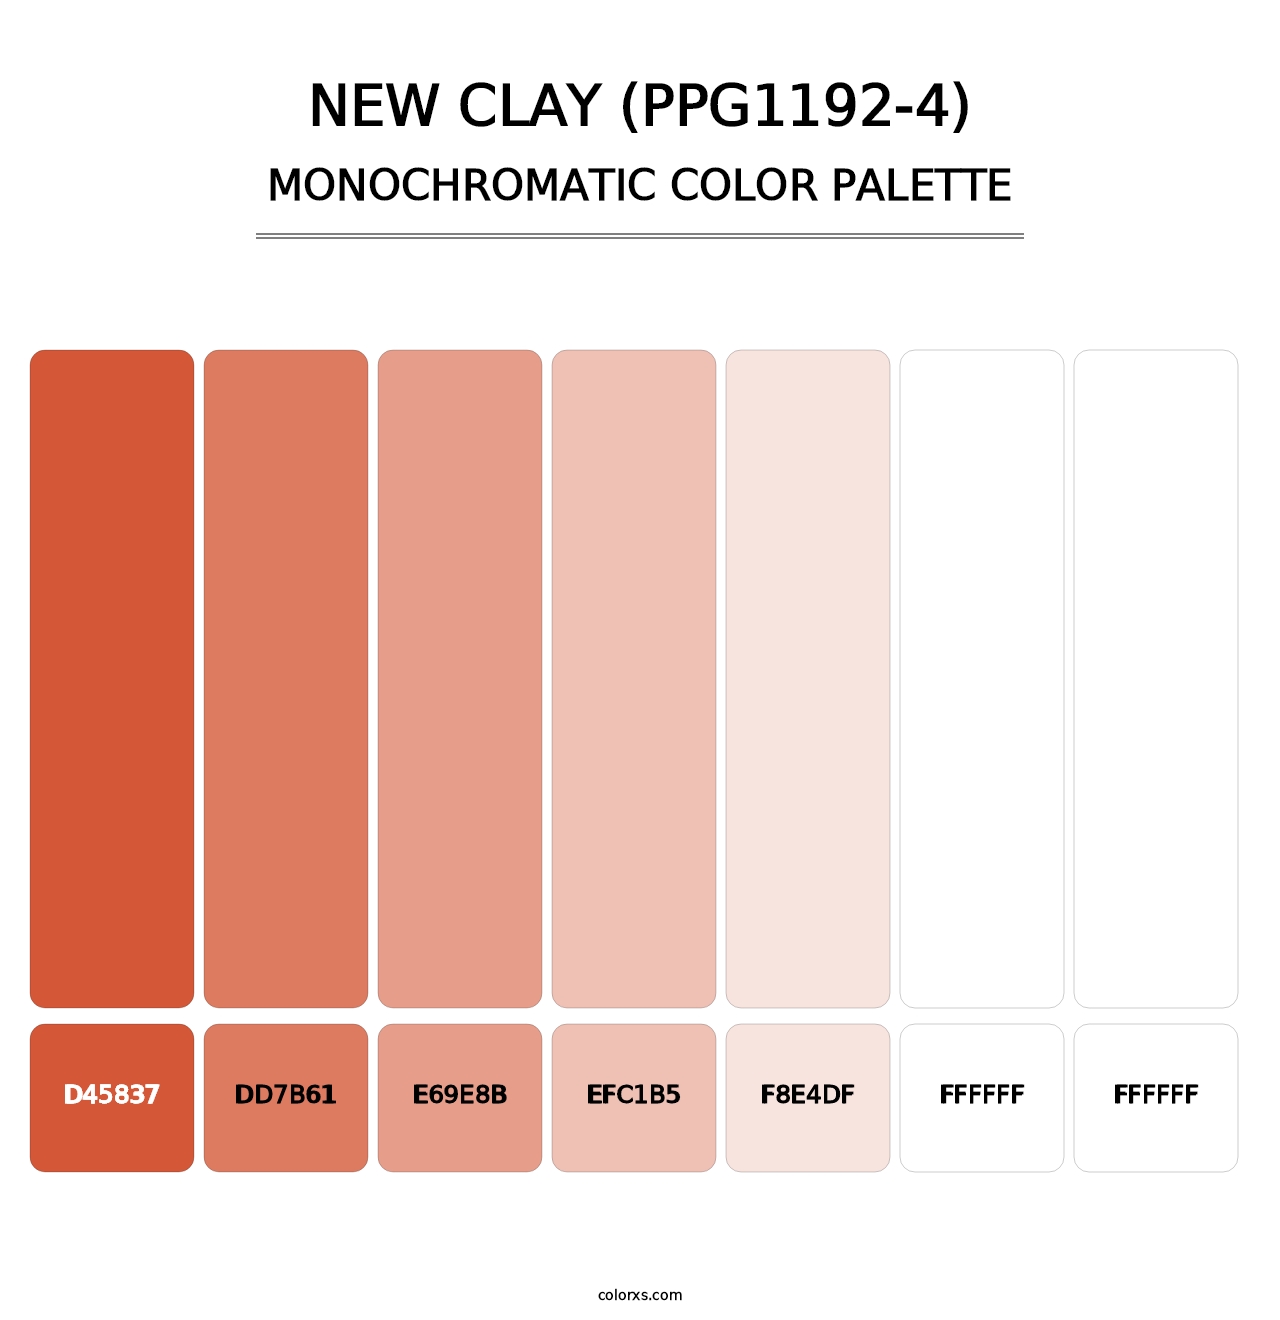 New Clay (PPG1192-4) - Monochromatic Color Palette